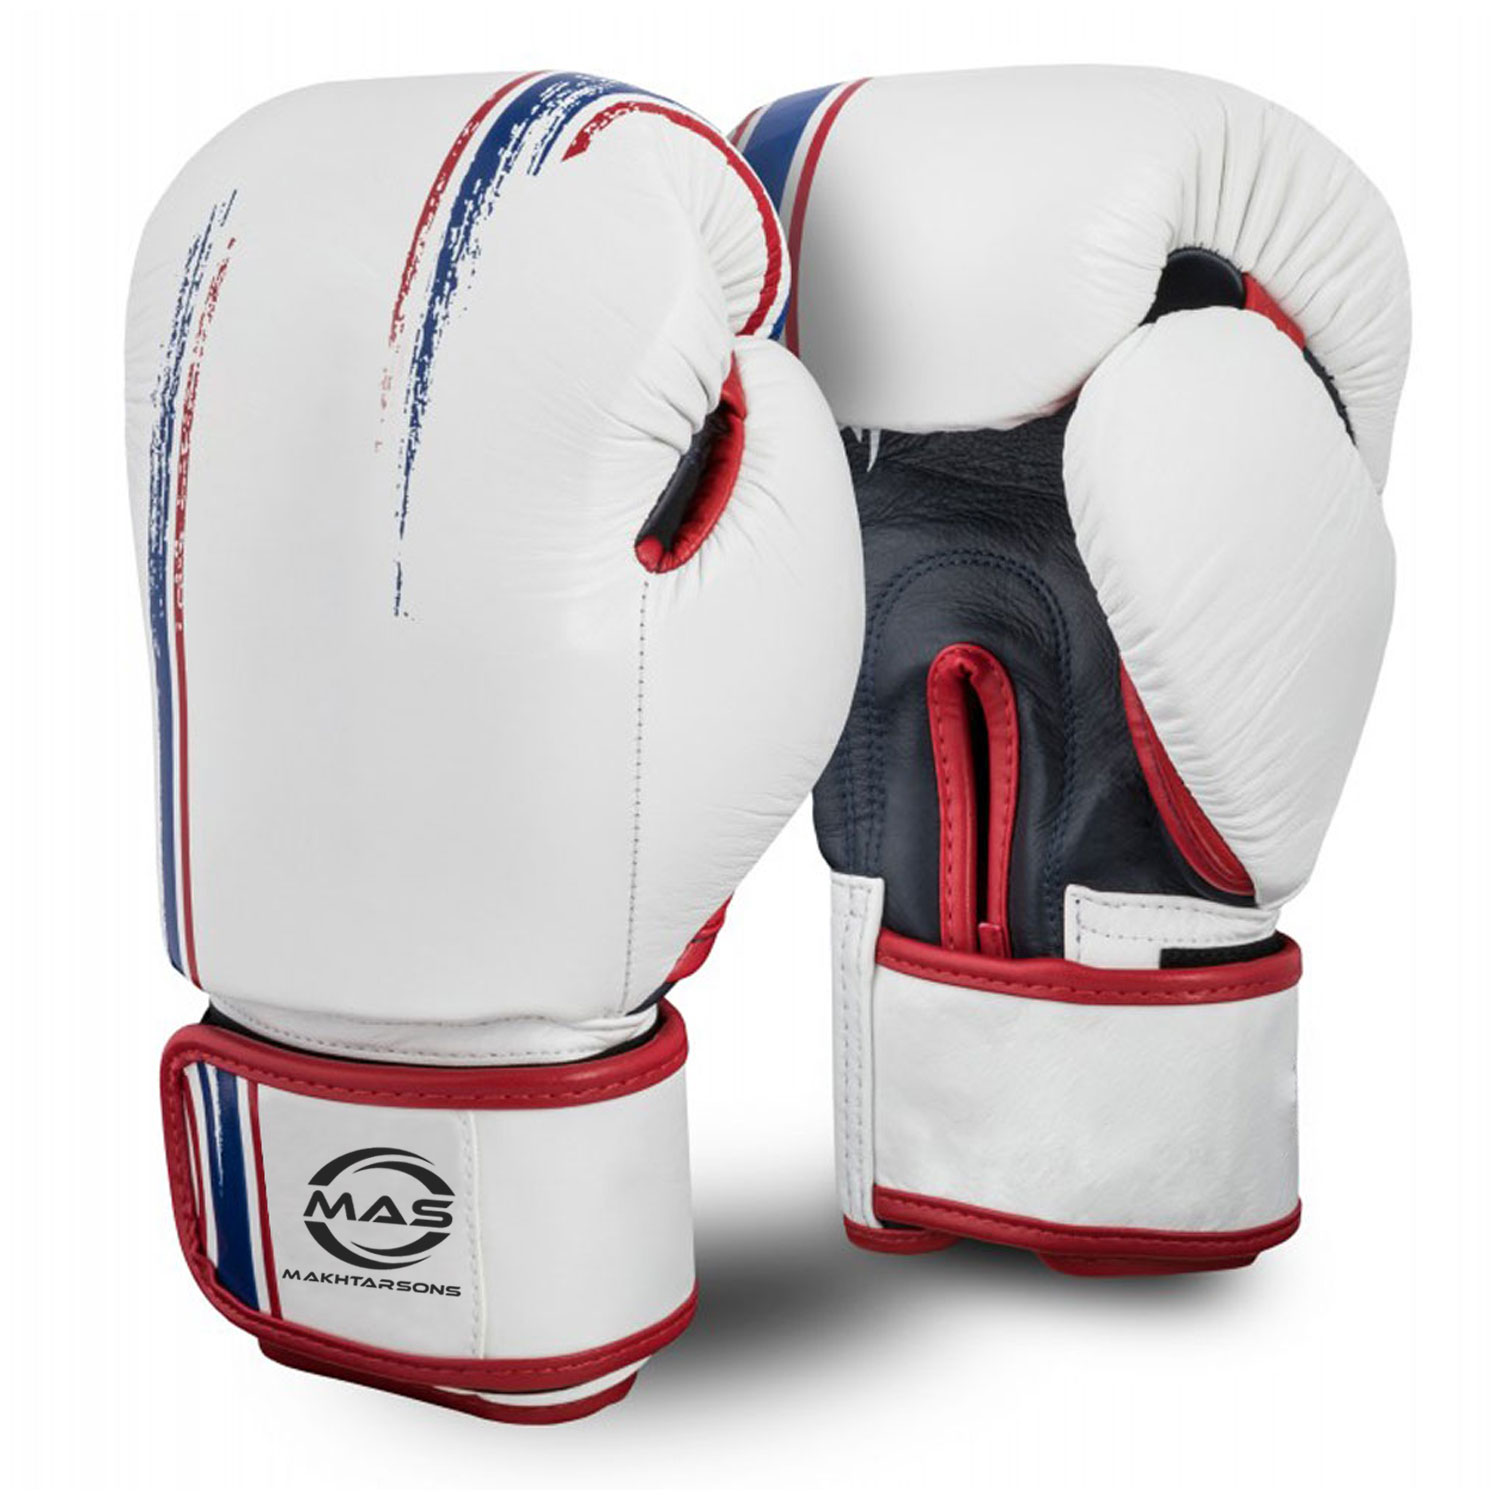 PROFESSIONAL BOXING GLOVES | MAS 208